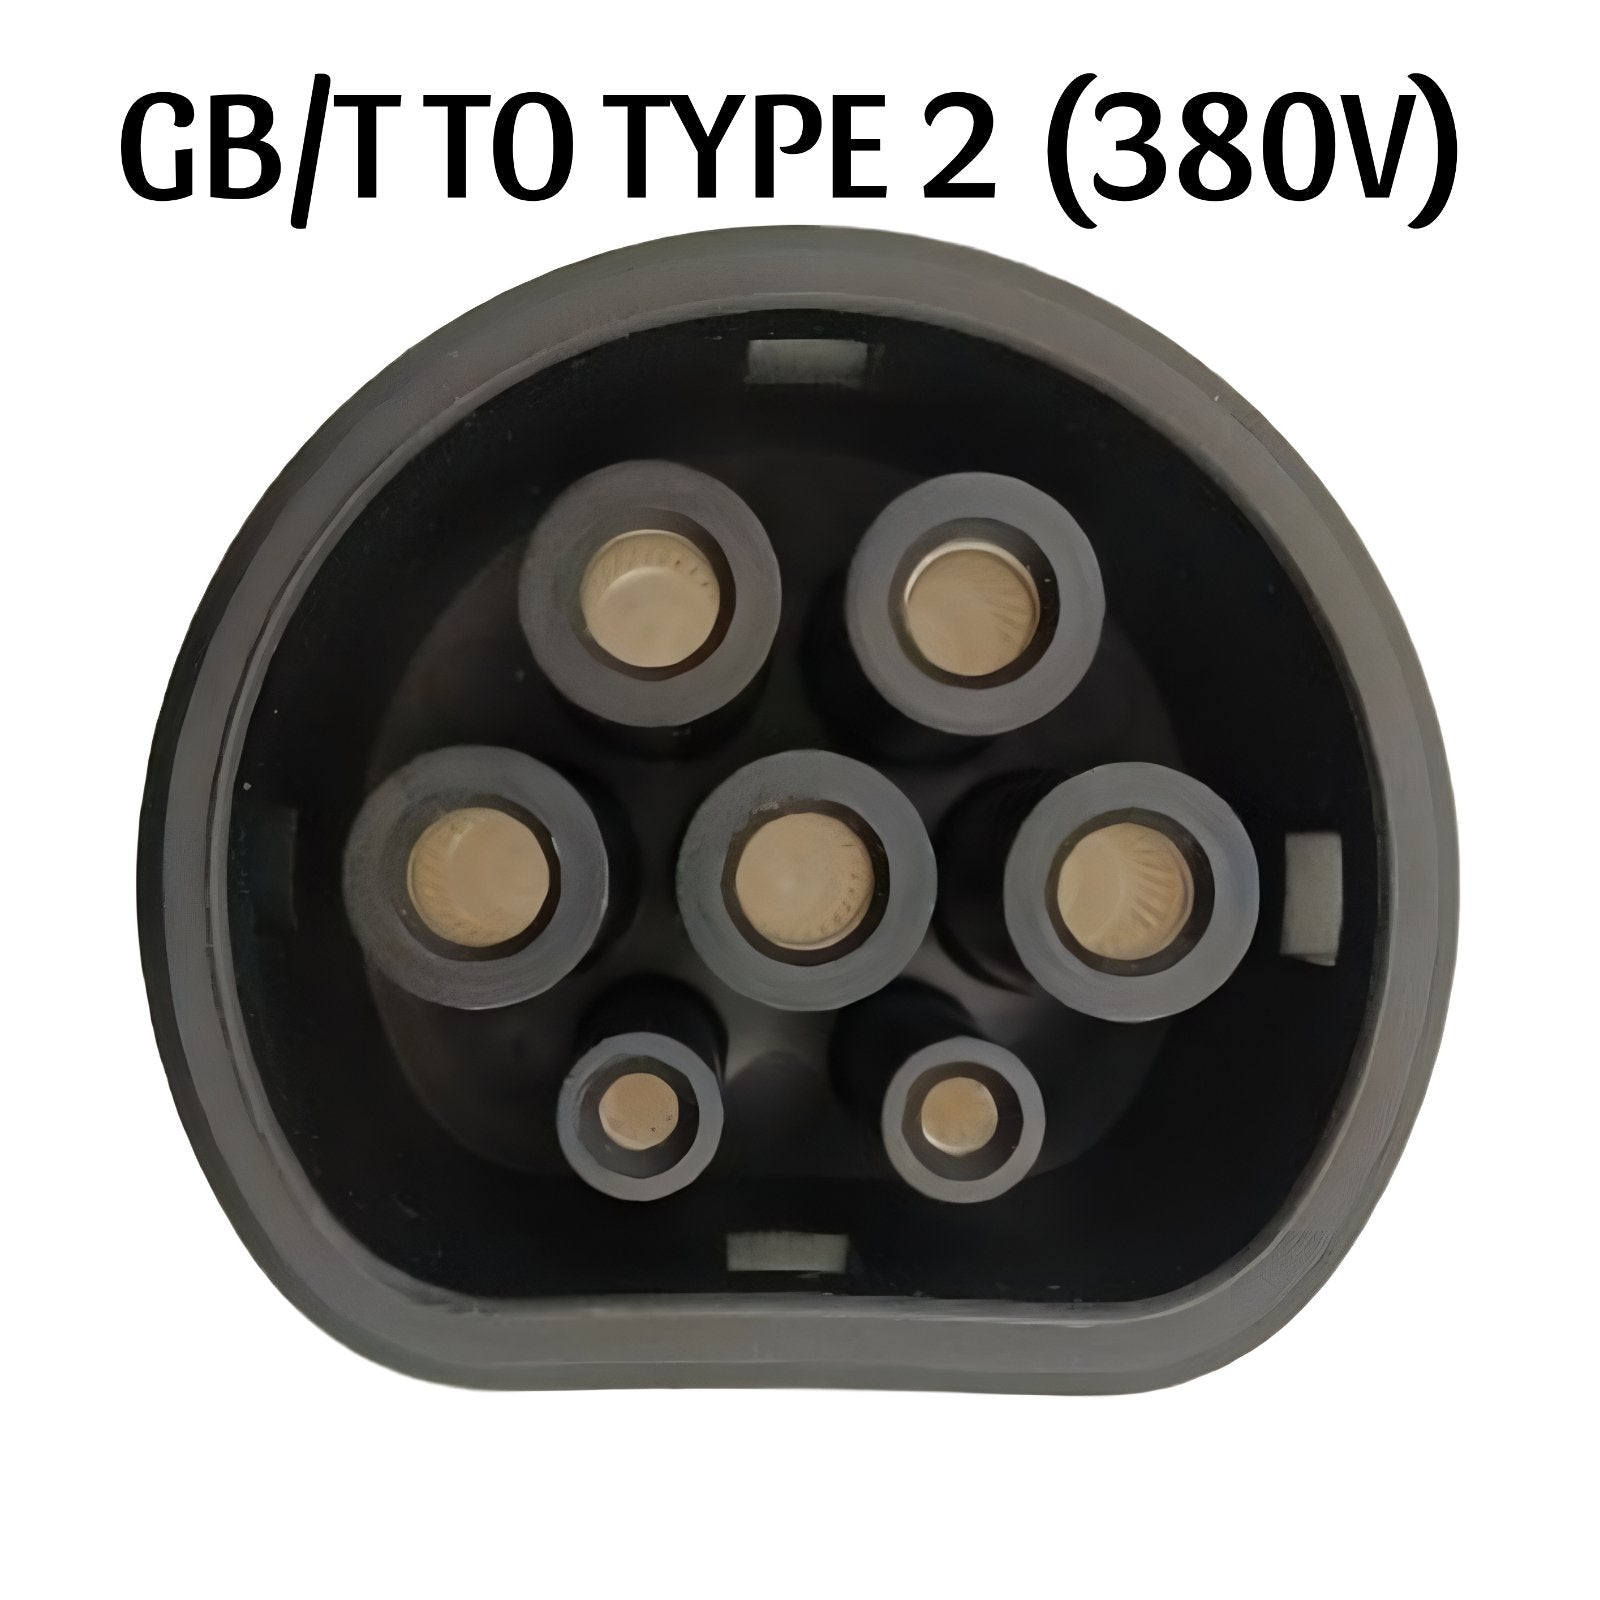 GB/T TO TYPE 2 (380V) EV ADAPTERS